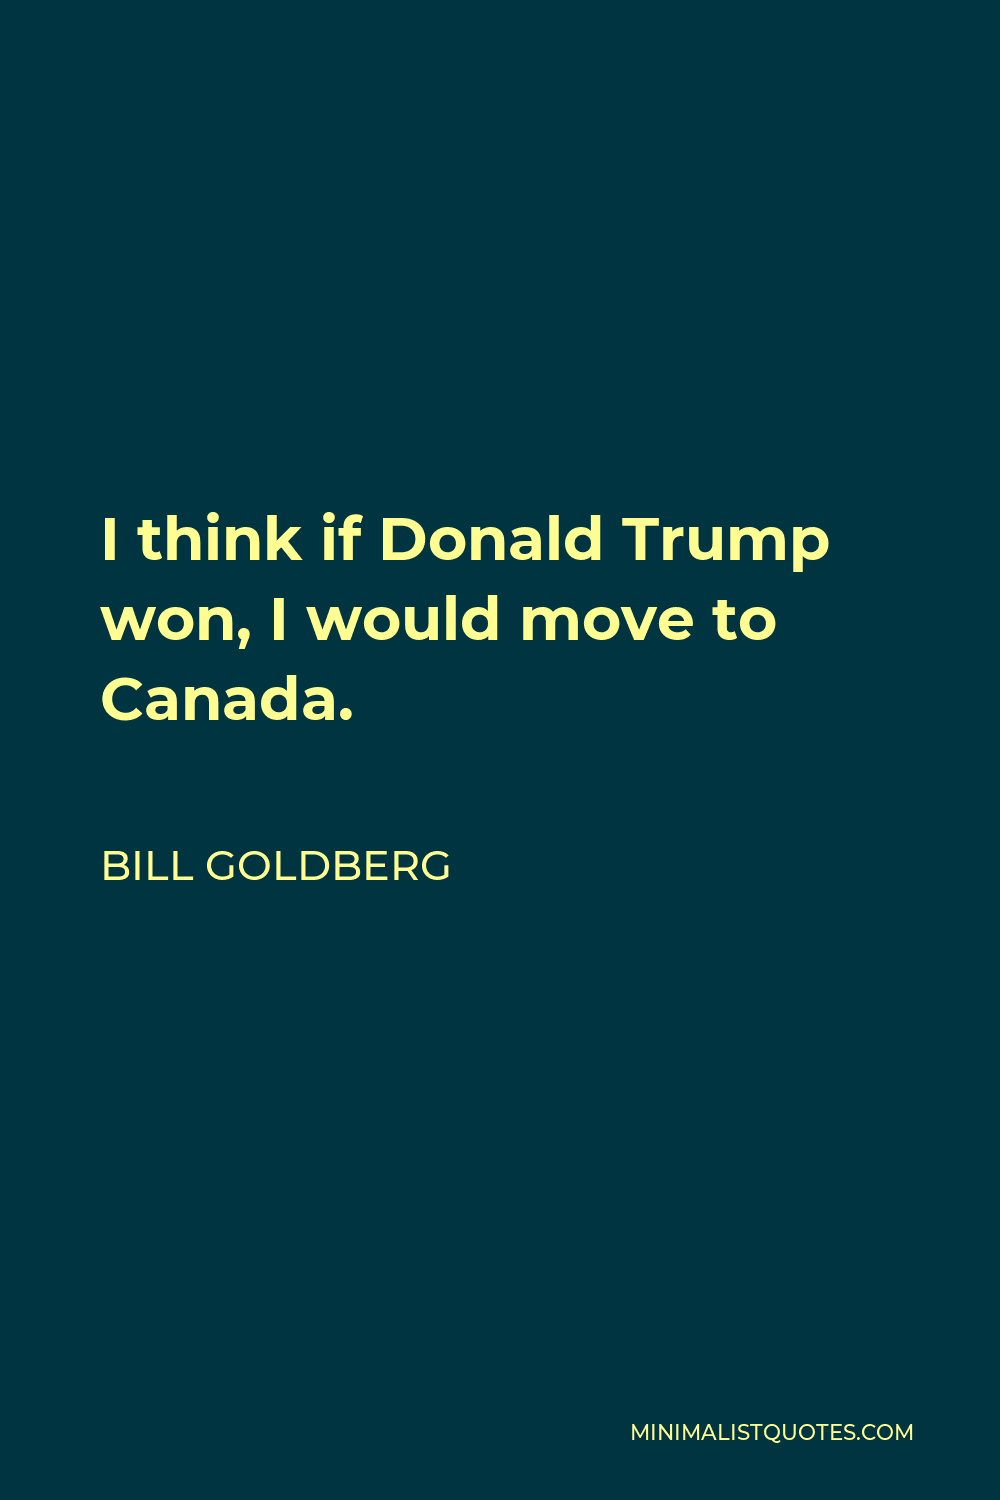 Bill Goldberg Quote - I think if Donald Trump won, I would move to Canada.